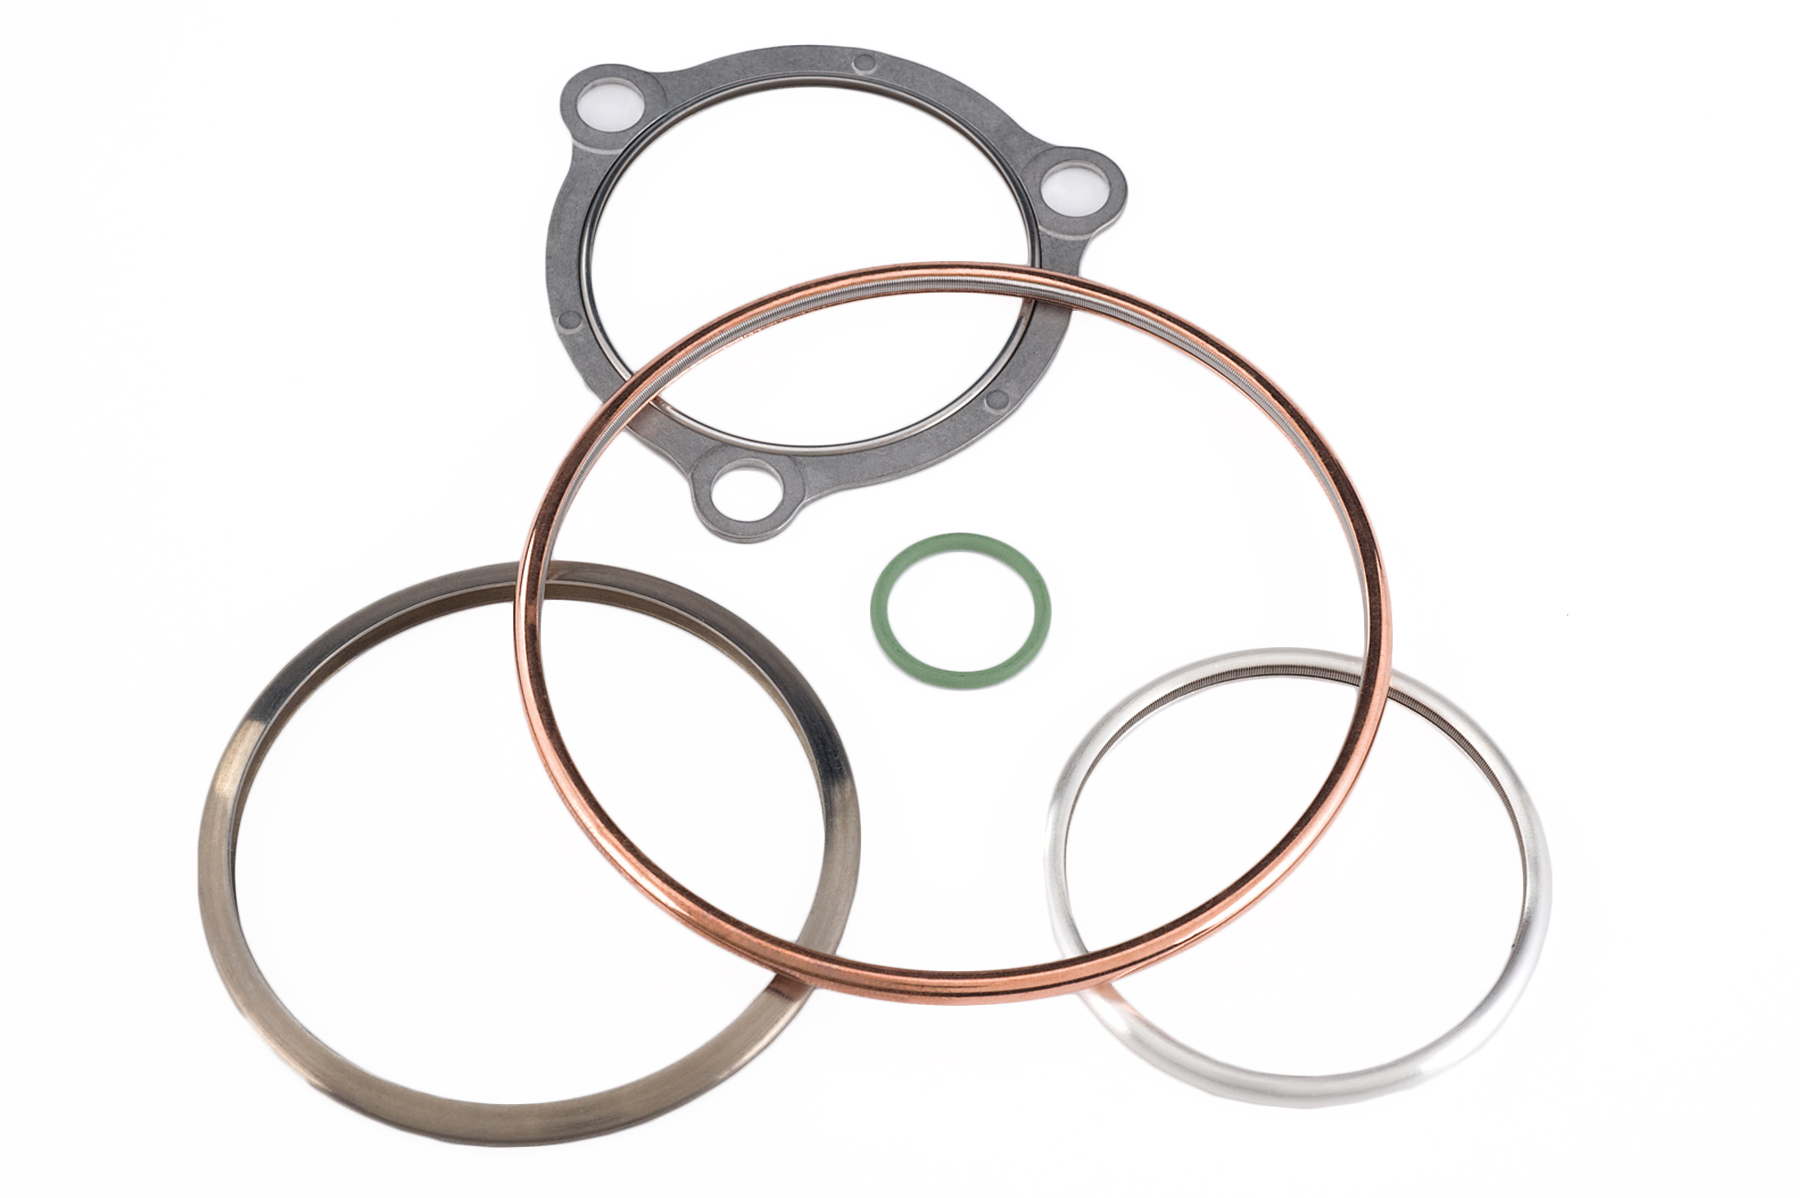 Metal seals for extreme temperature and pressure applications